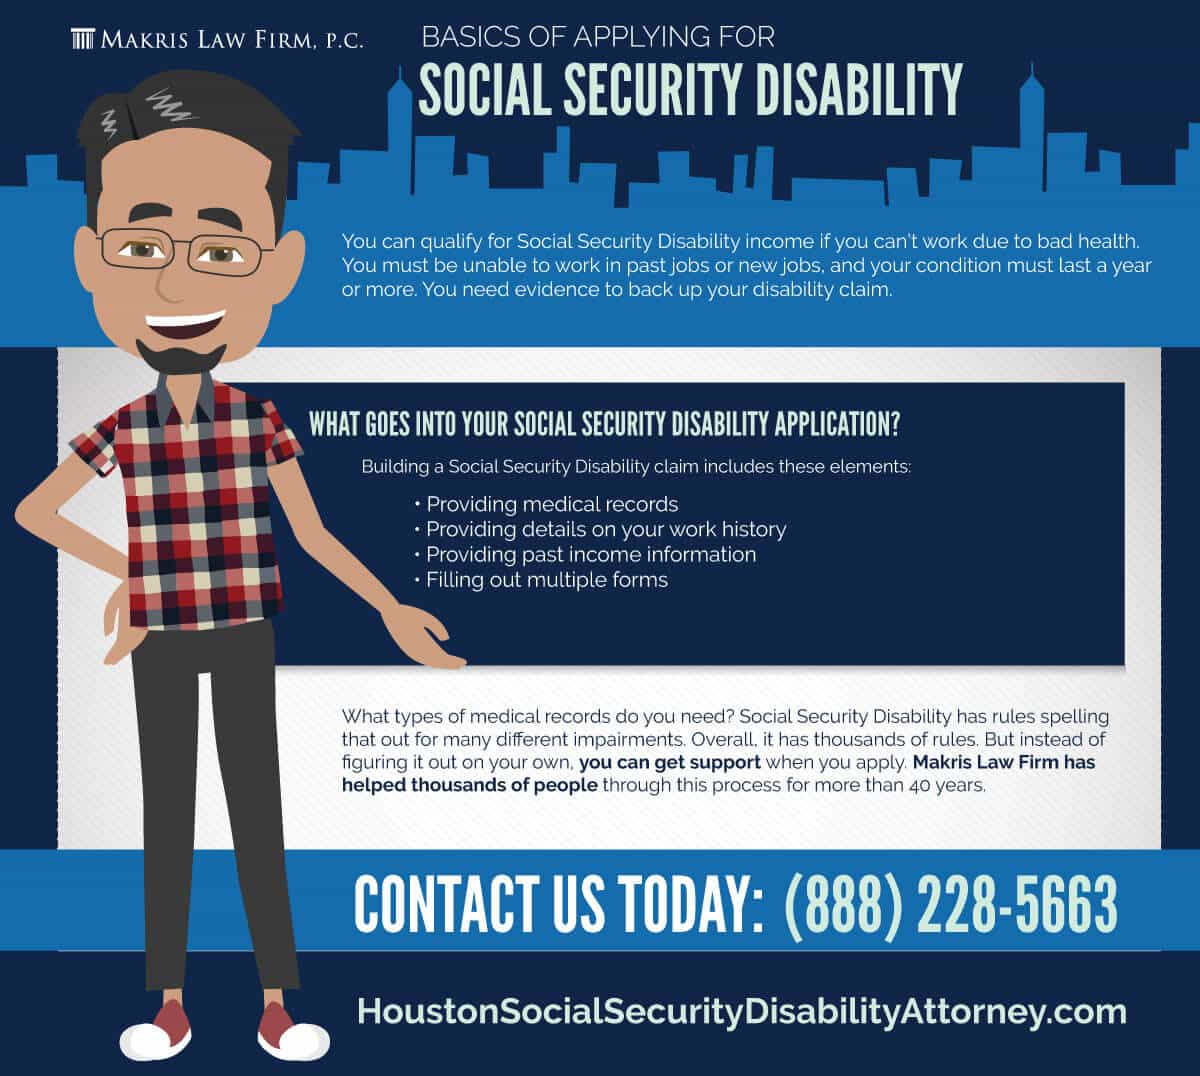 Applying For Social Security Disability in Houston